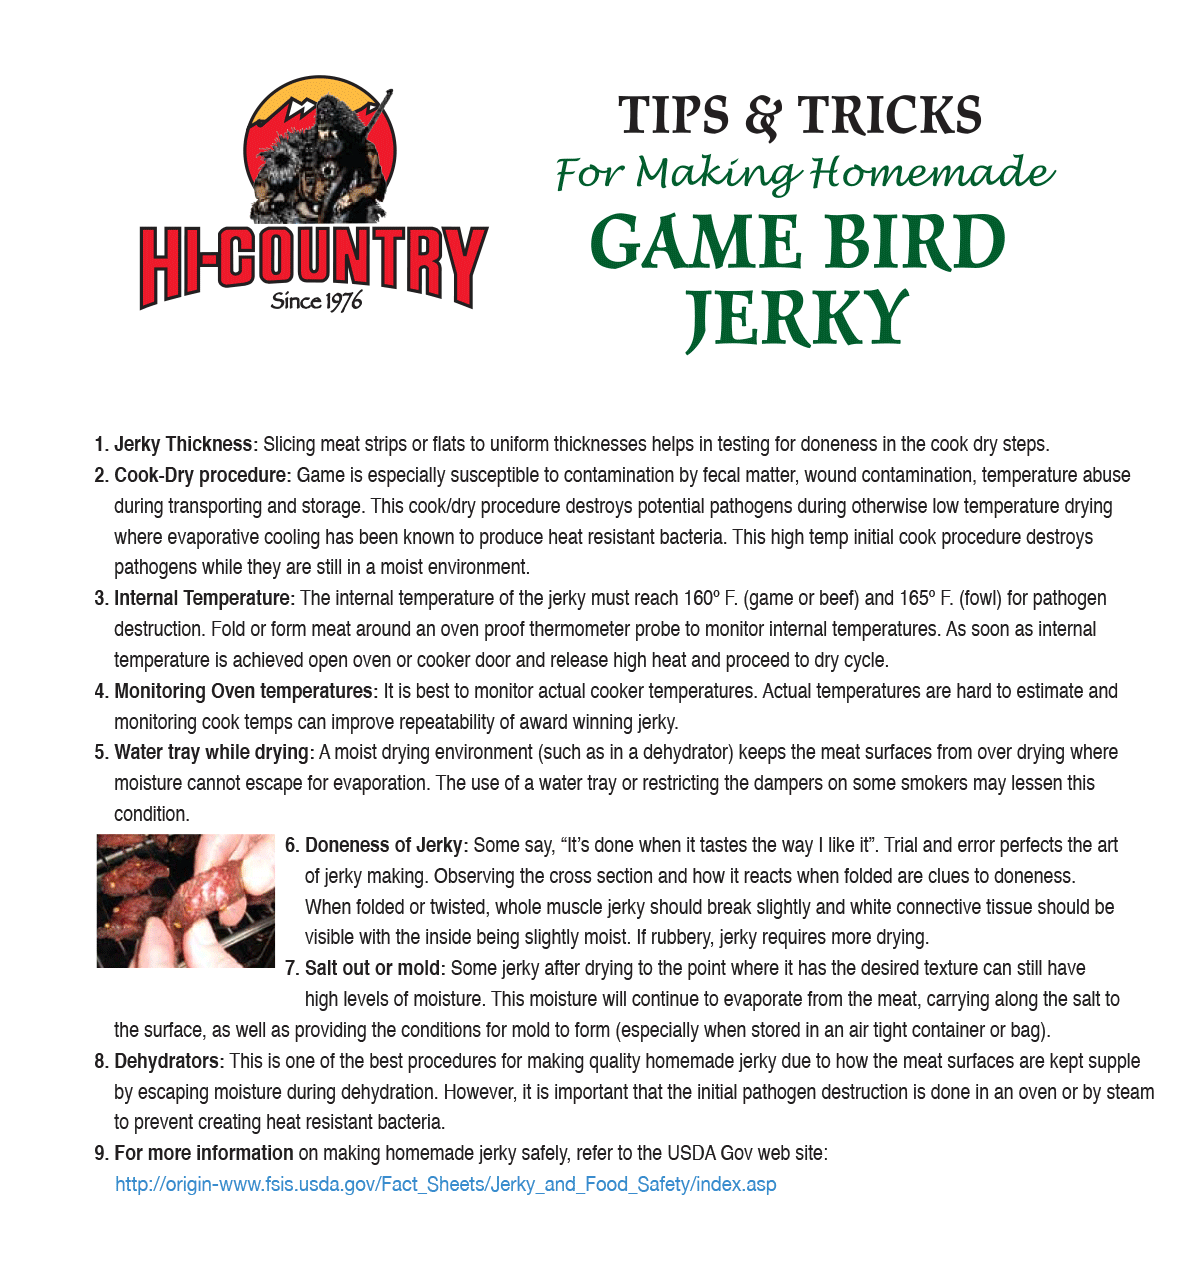 Ground Formed Game Bird Jerky Instructions